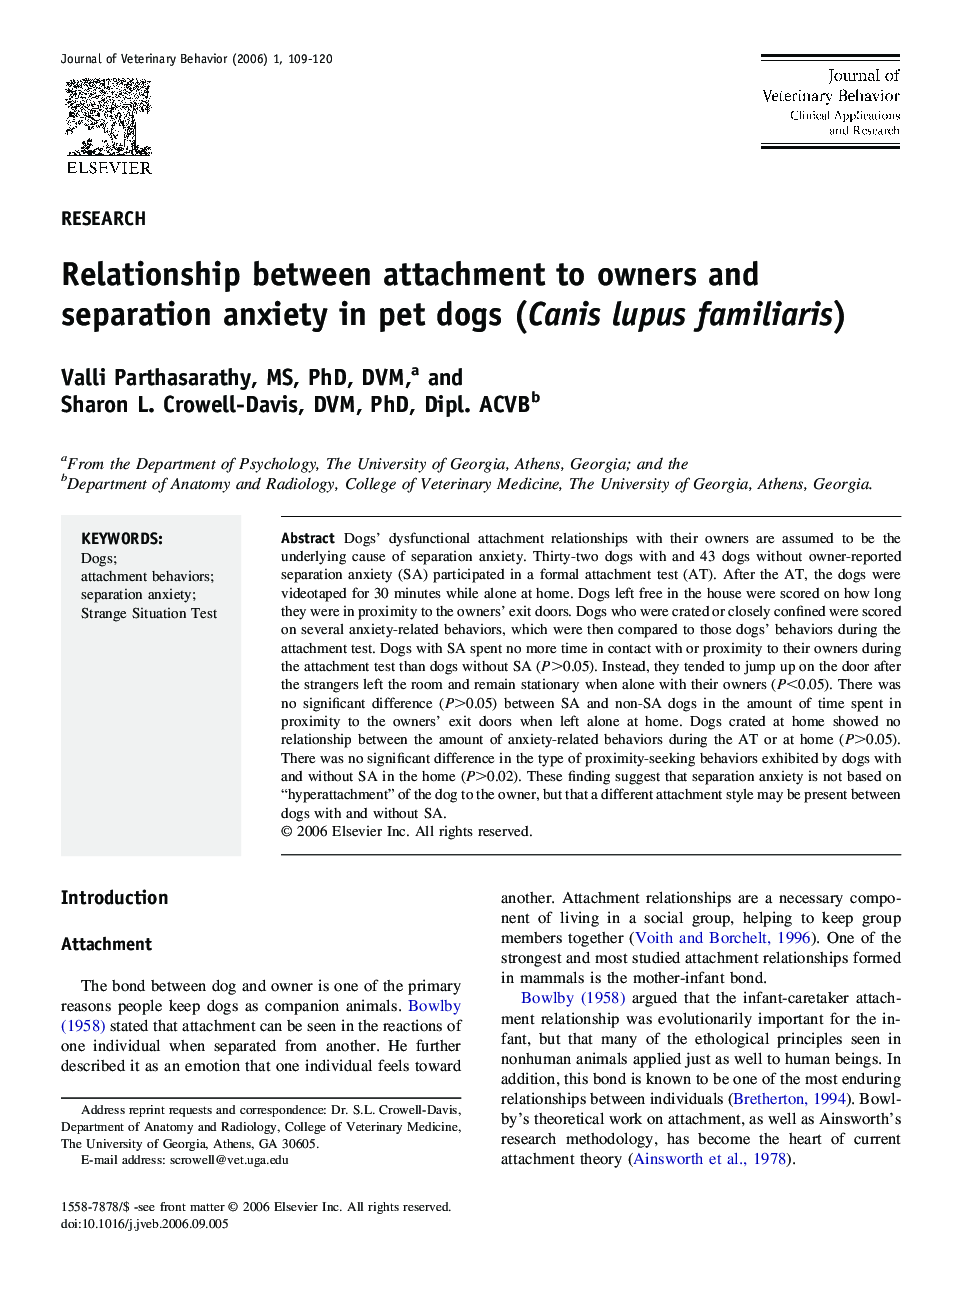 Relationship between attachment to owners and separation anxiety in pet dogs (Canis lupus familiaris)